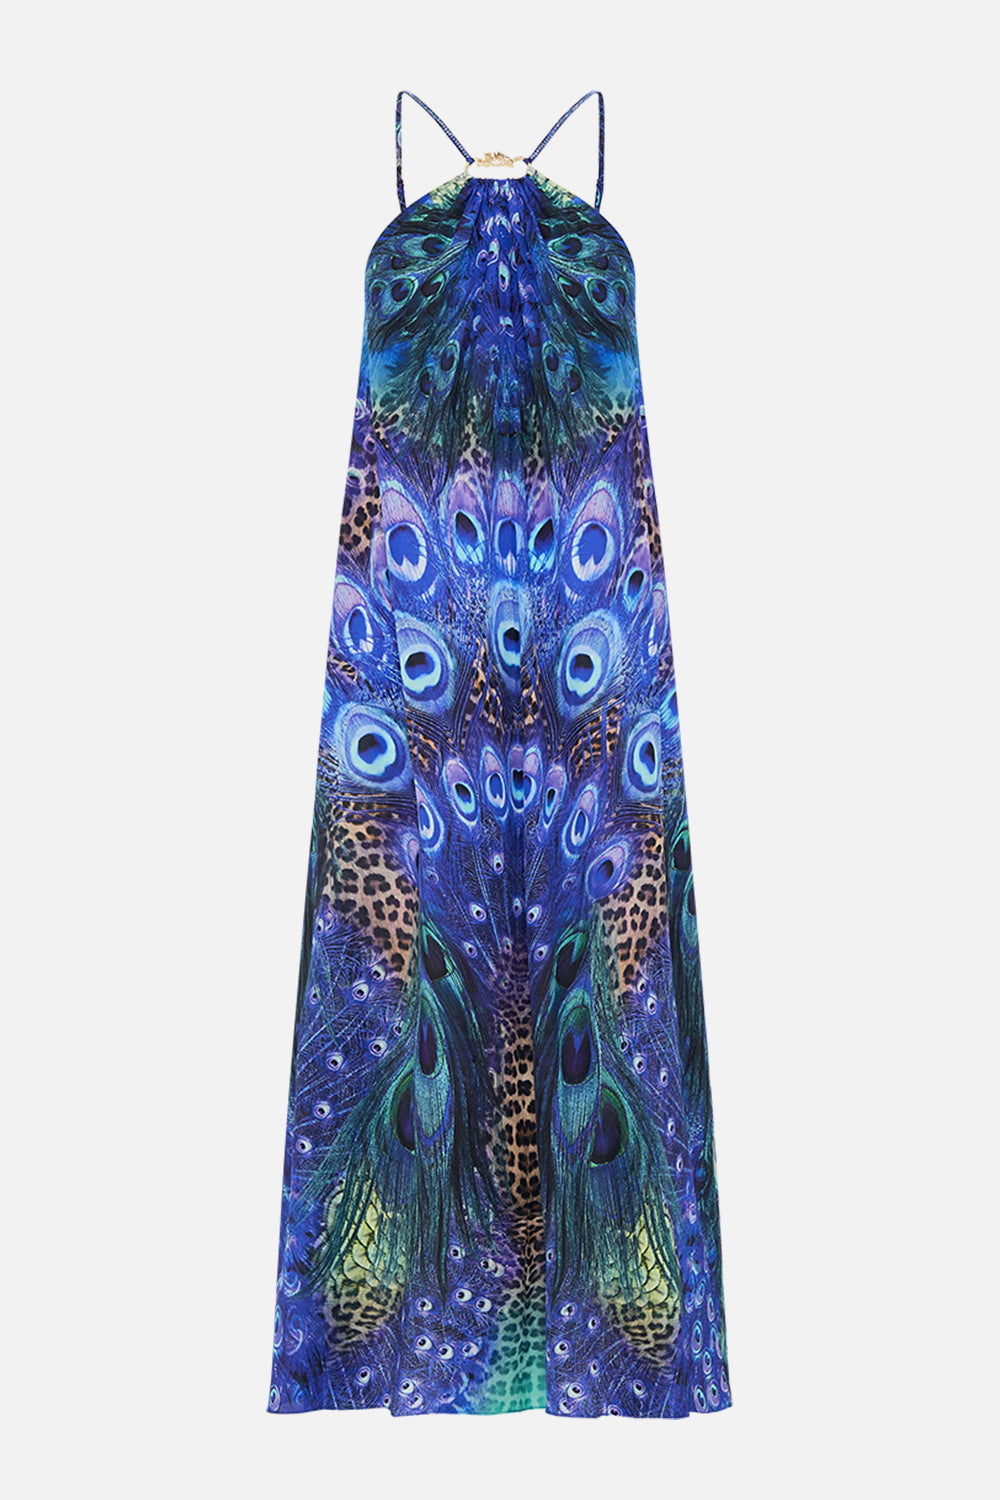 Product view of CAMILLA silk maxi dress in Peacock Rock print